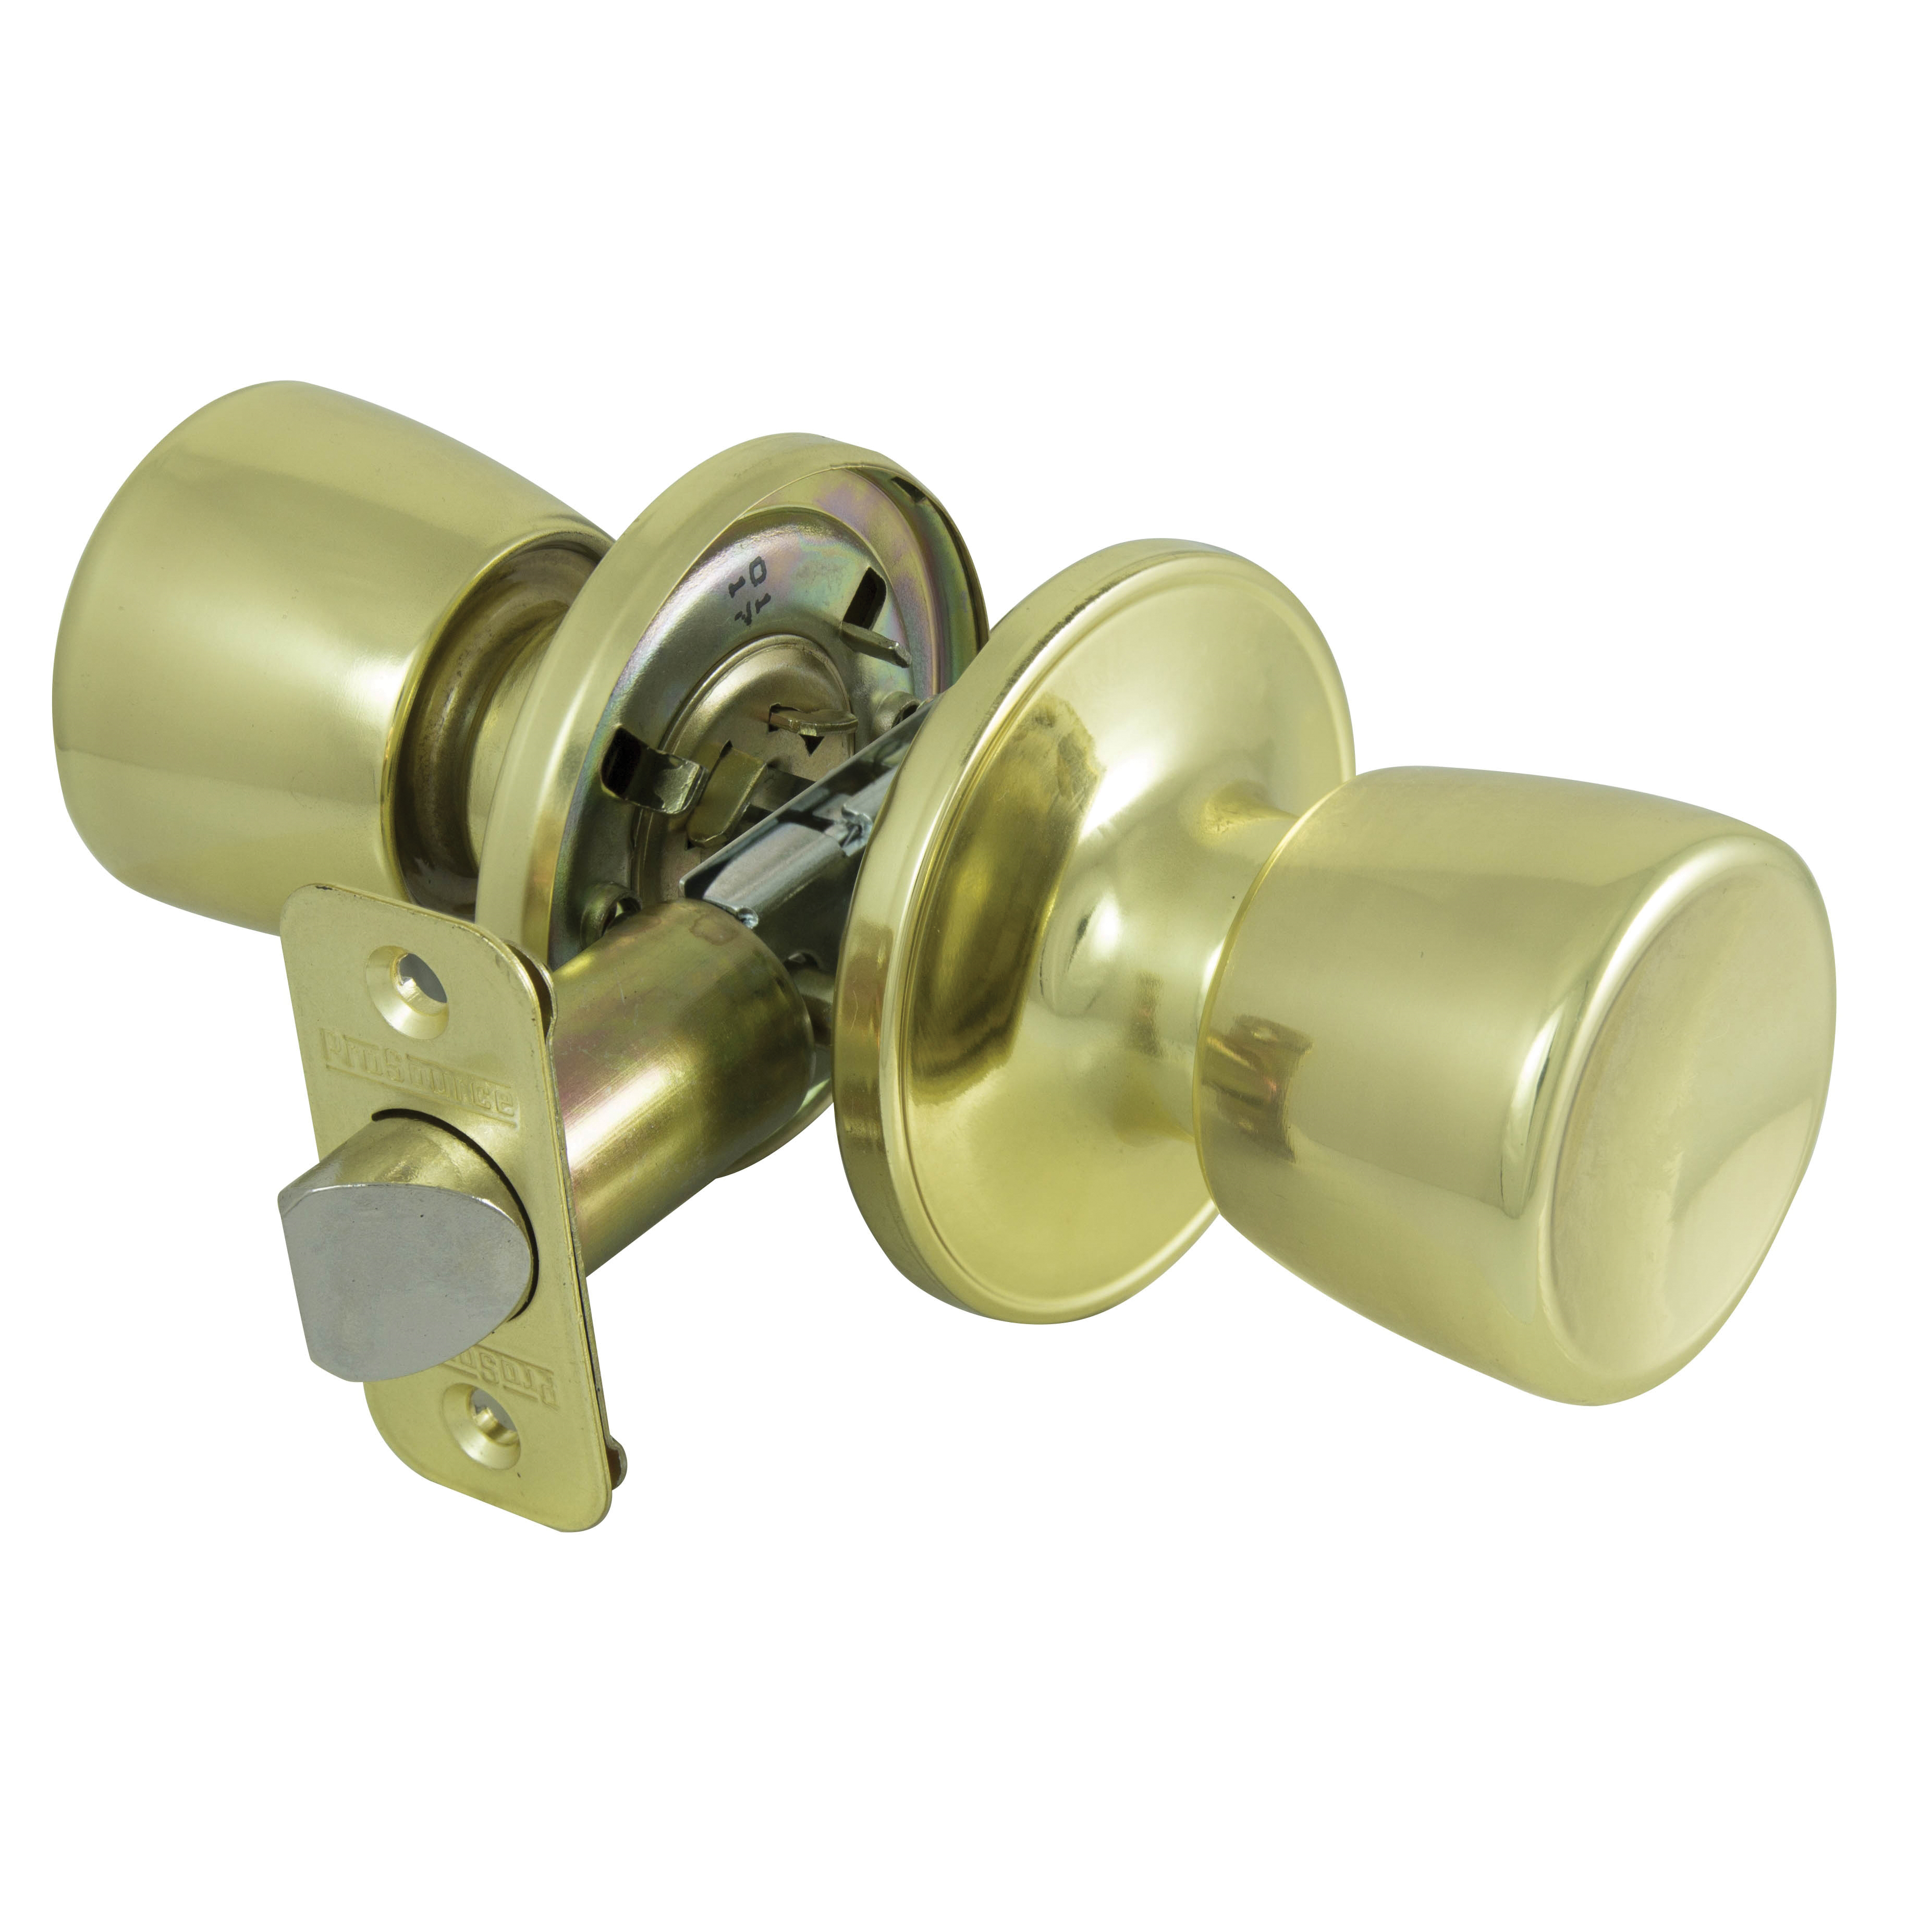 TS730BRA4V Passage Knob, Metal, Polished Brass, 2-3/8 to 2-3/4 in Backset, 1-3/8 to 1-3/4 in Thick Door